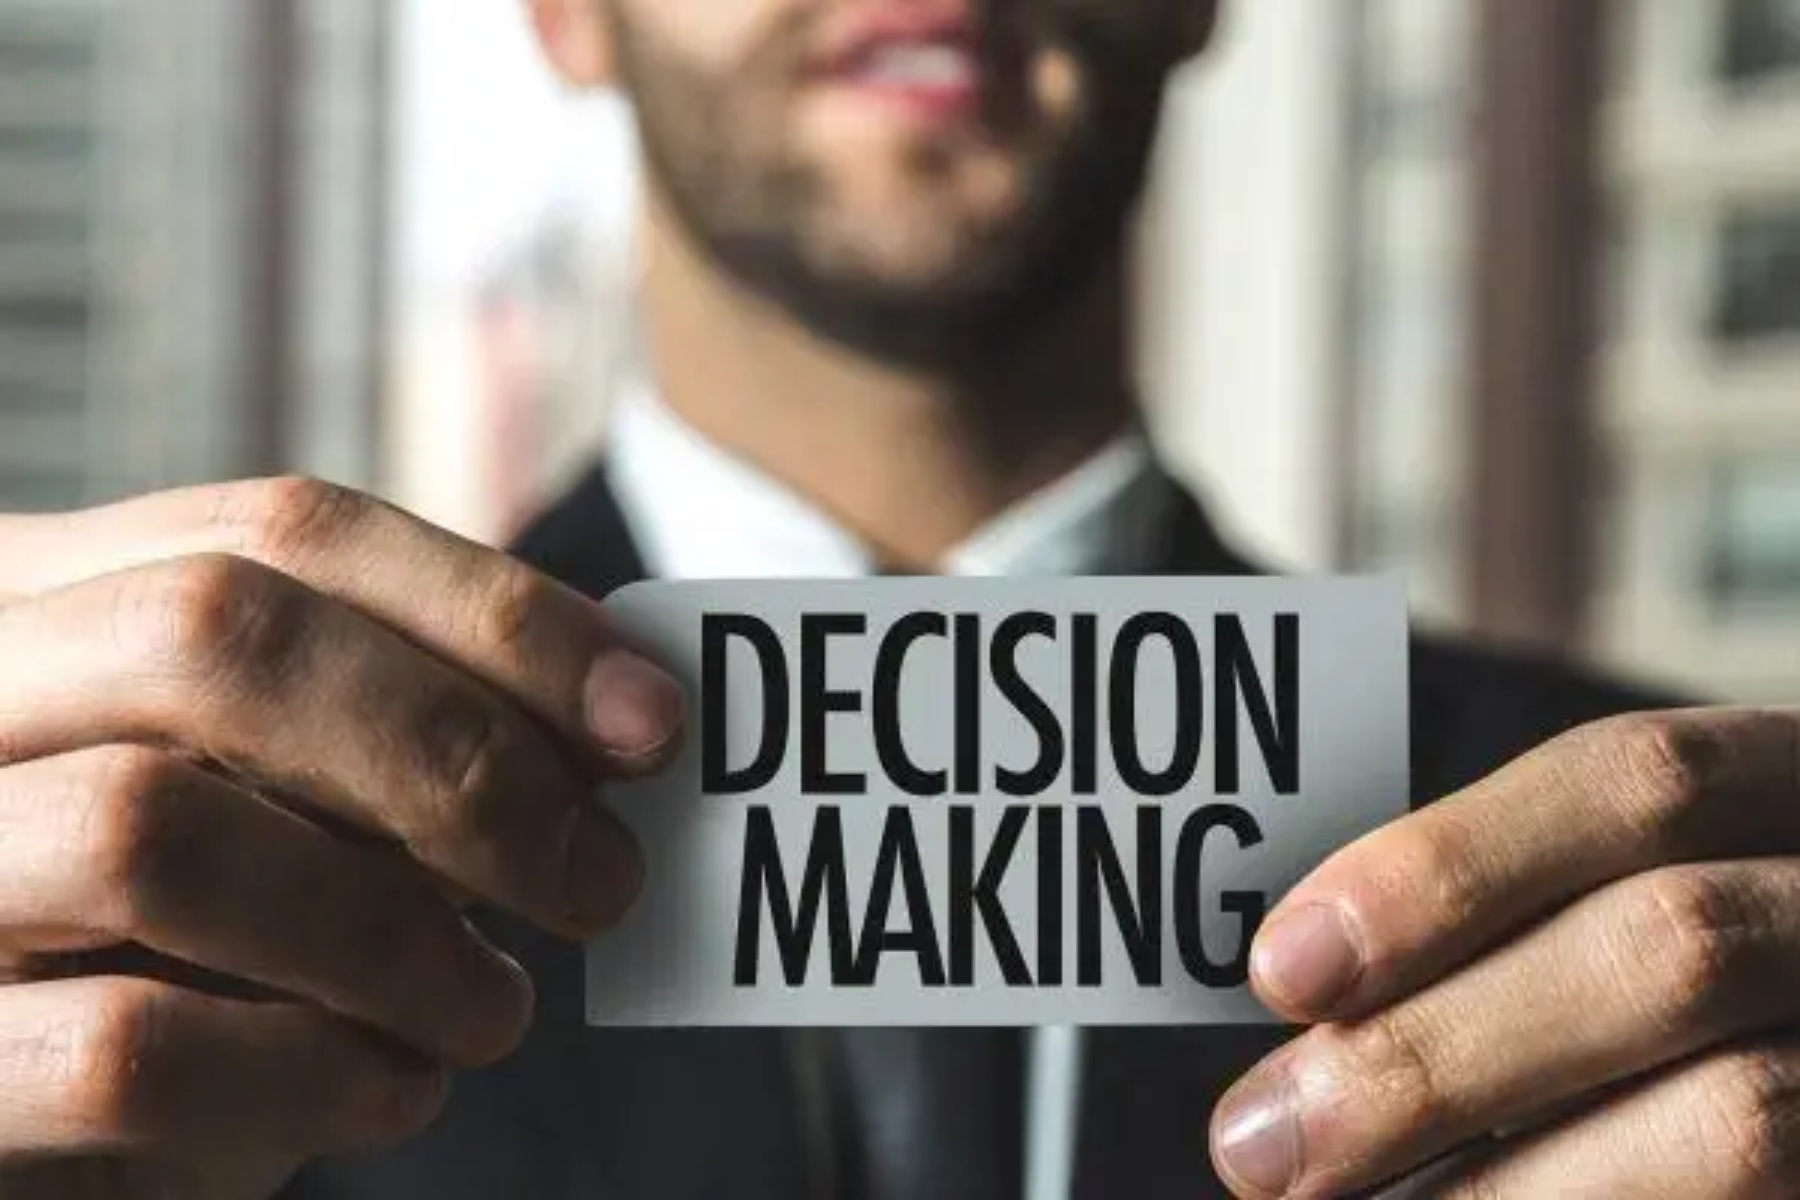 In front of the camera, a businessman holds a piece of paper with the words "Decision Making"